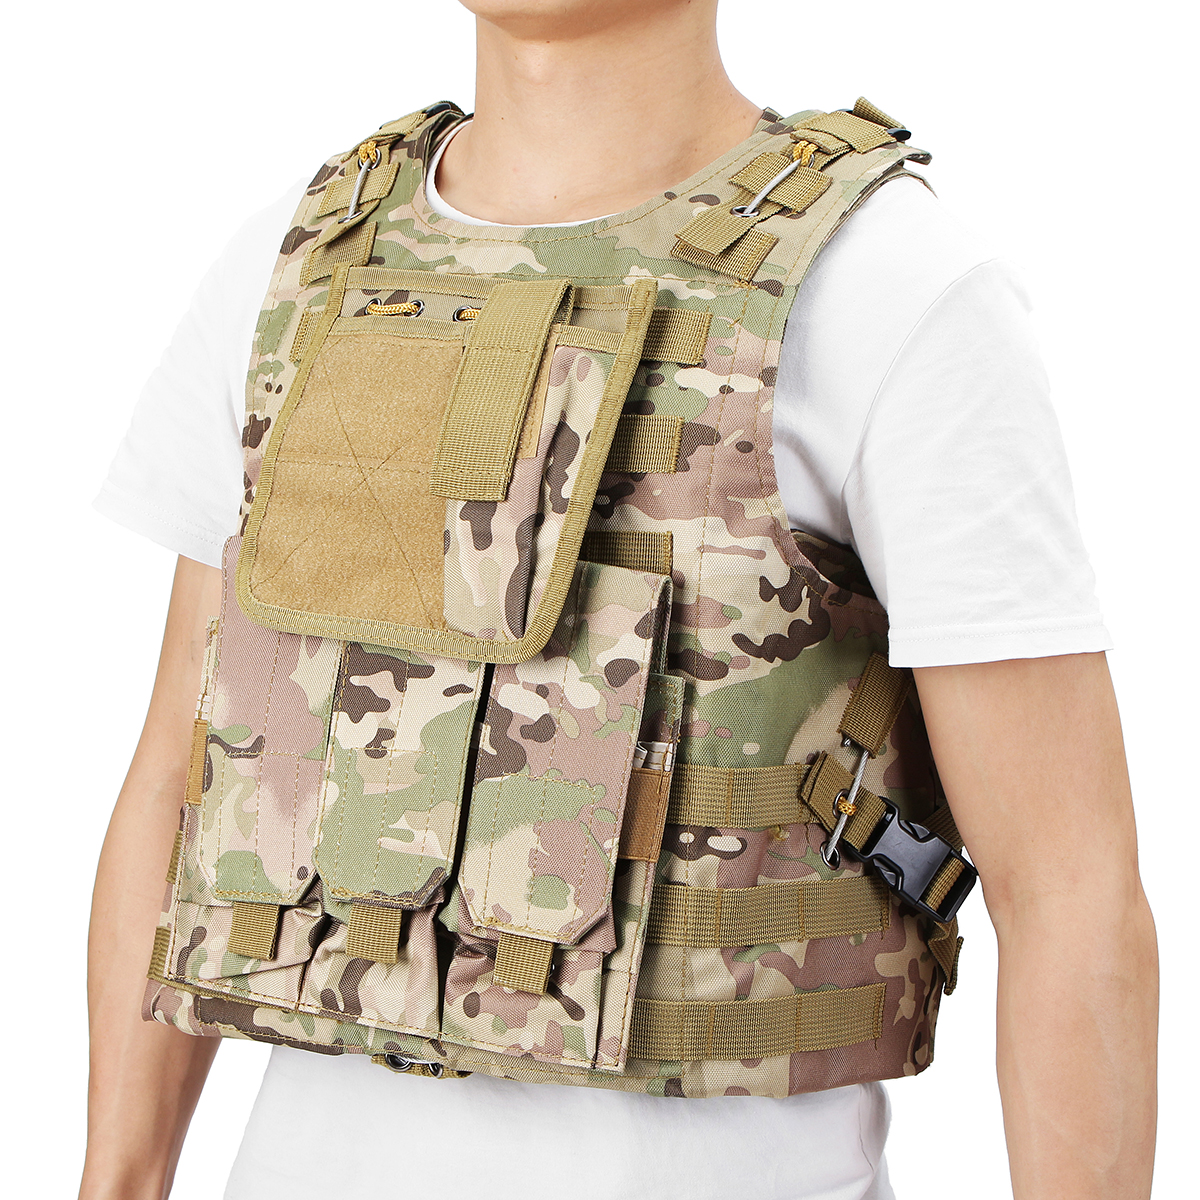 Military-Tactical-Vest-Molle-Combat-Assault-Plate-Carrier-Tactical-Vest-CS-Outdoor-Clothing-Hunting--1817235-5